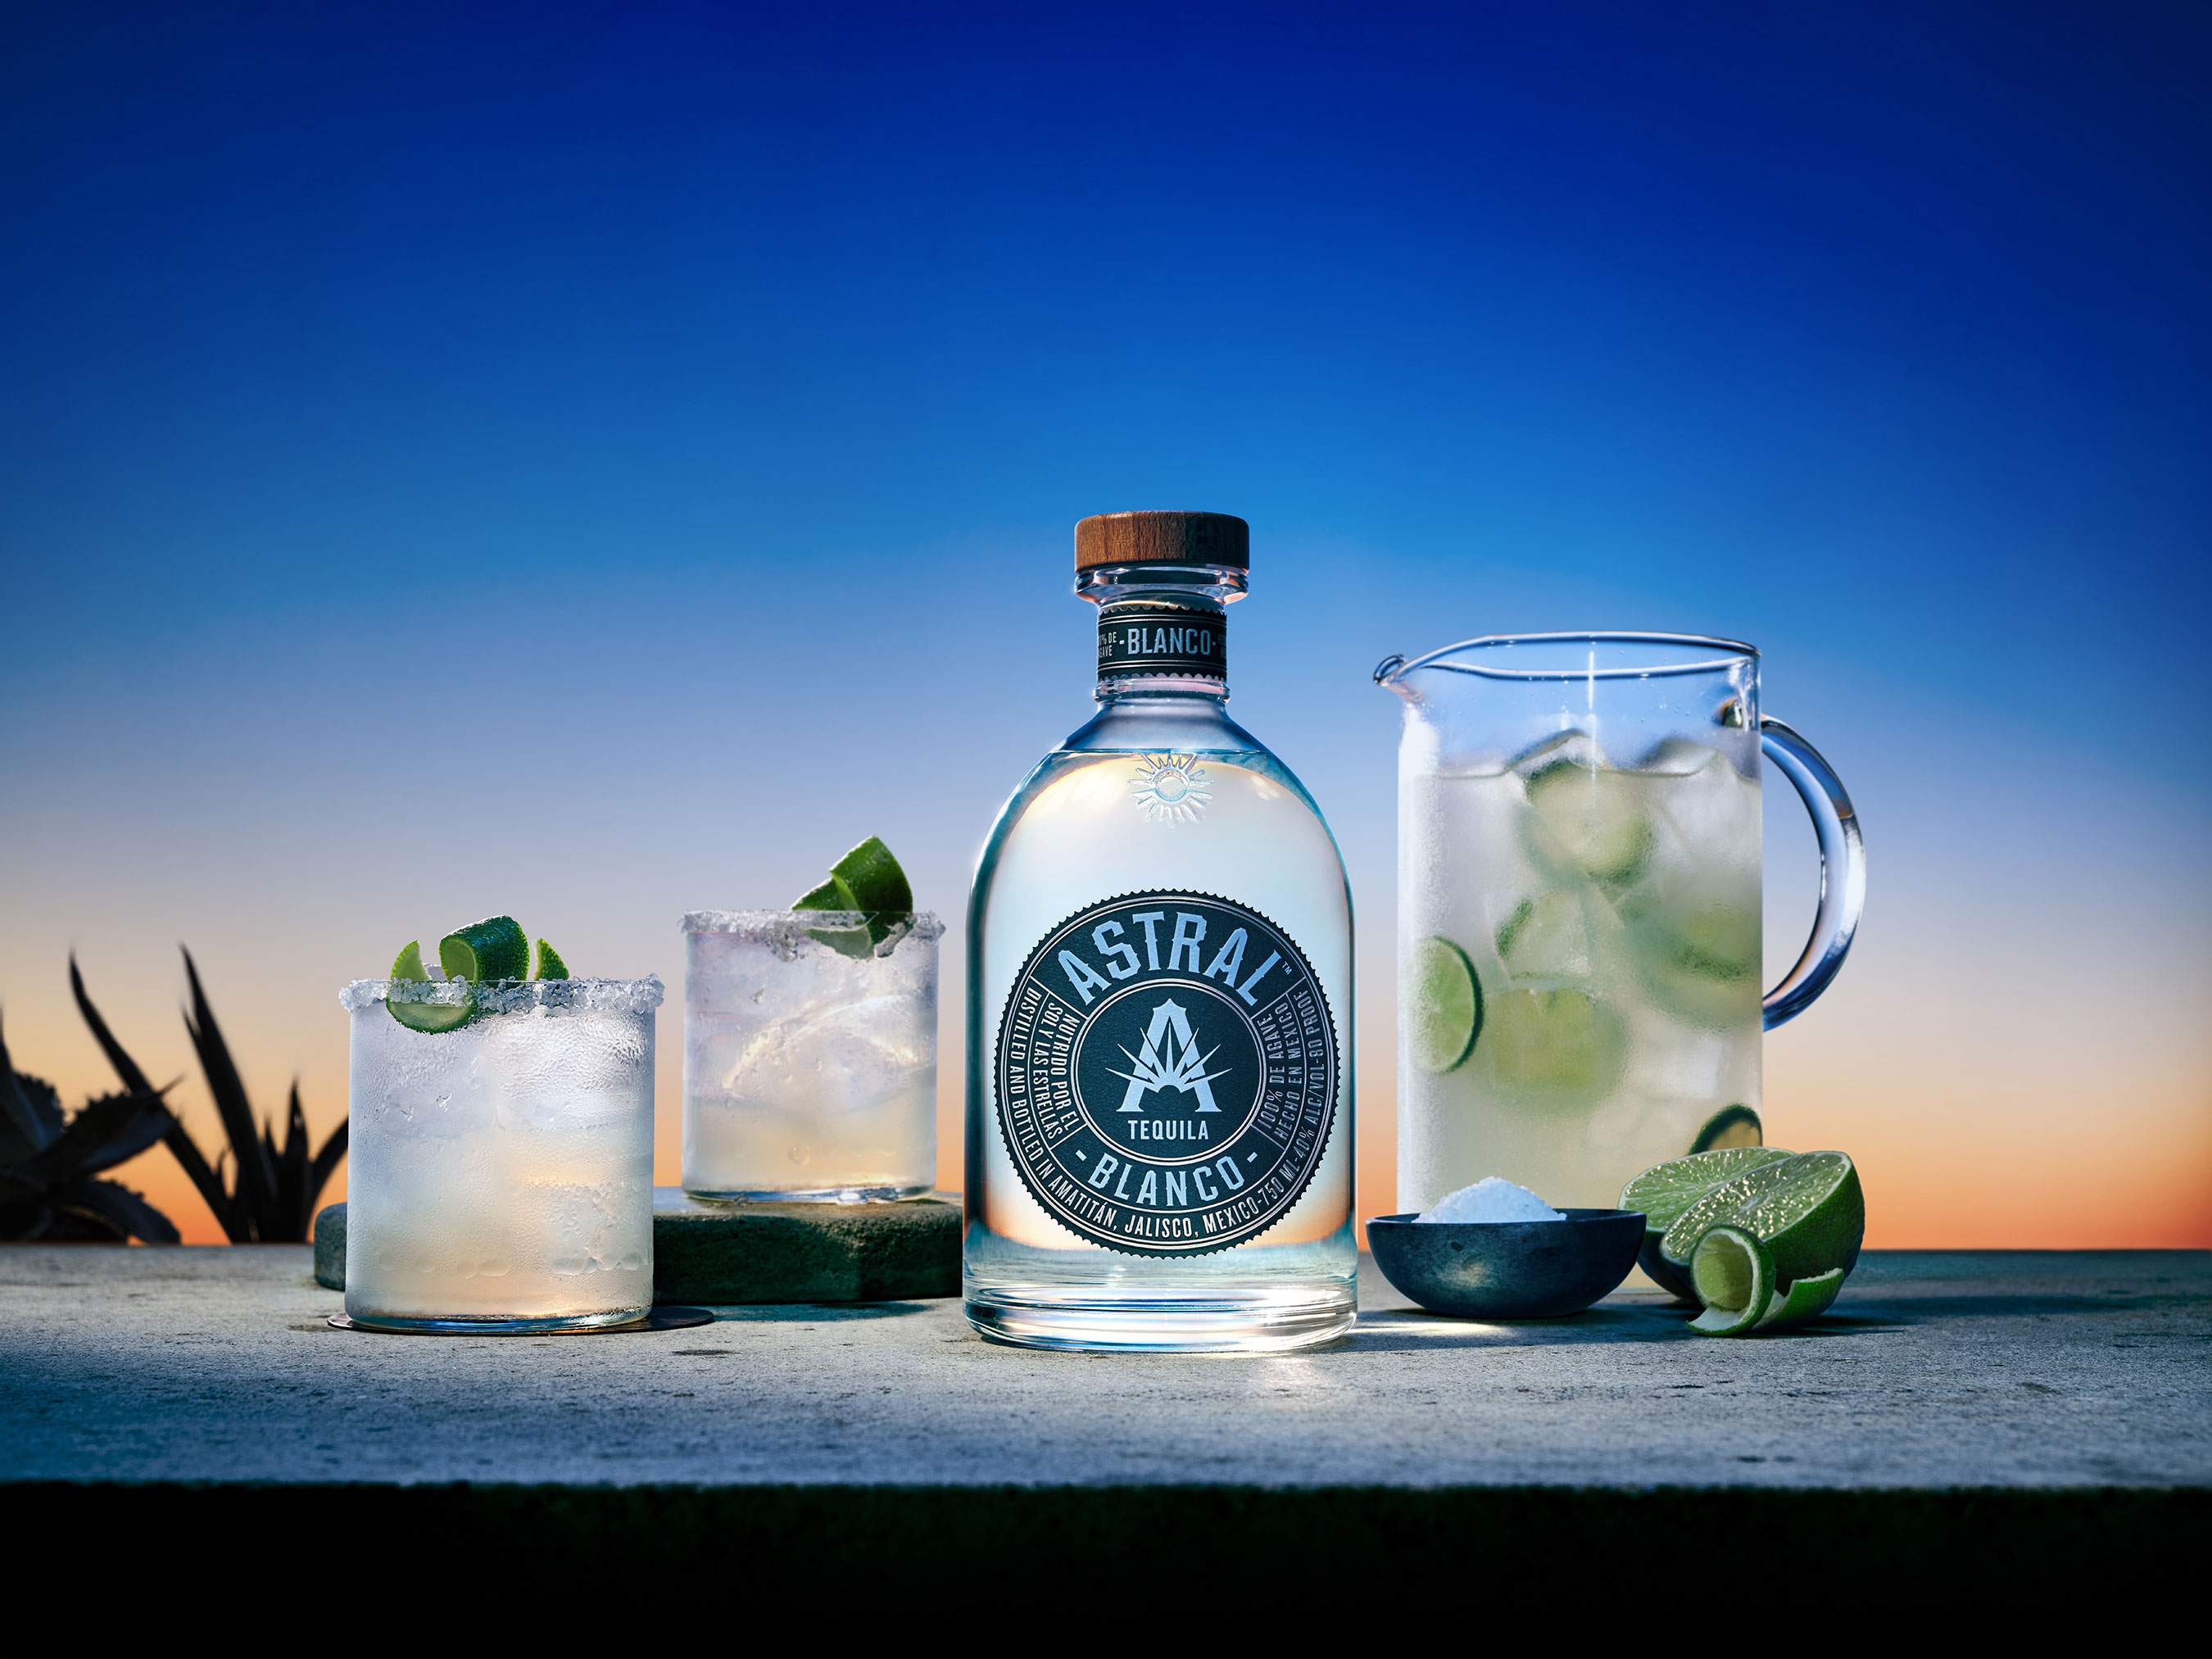 Astral Tequila Blanco is best mixed into a Stellar Margarita and enjoyed with friends during Azure Hour, the magical point in the day when the sun and stars meet.